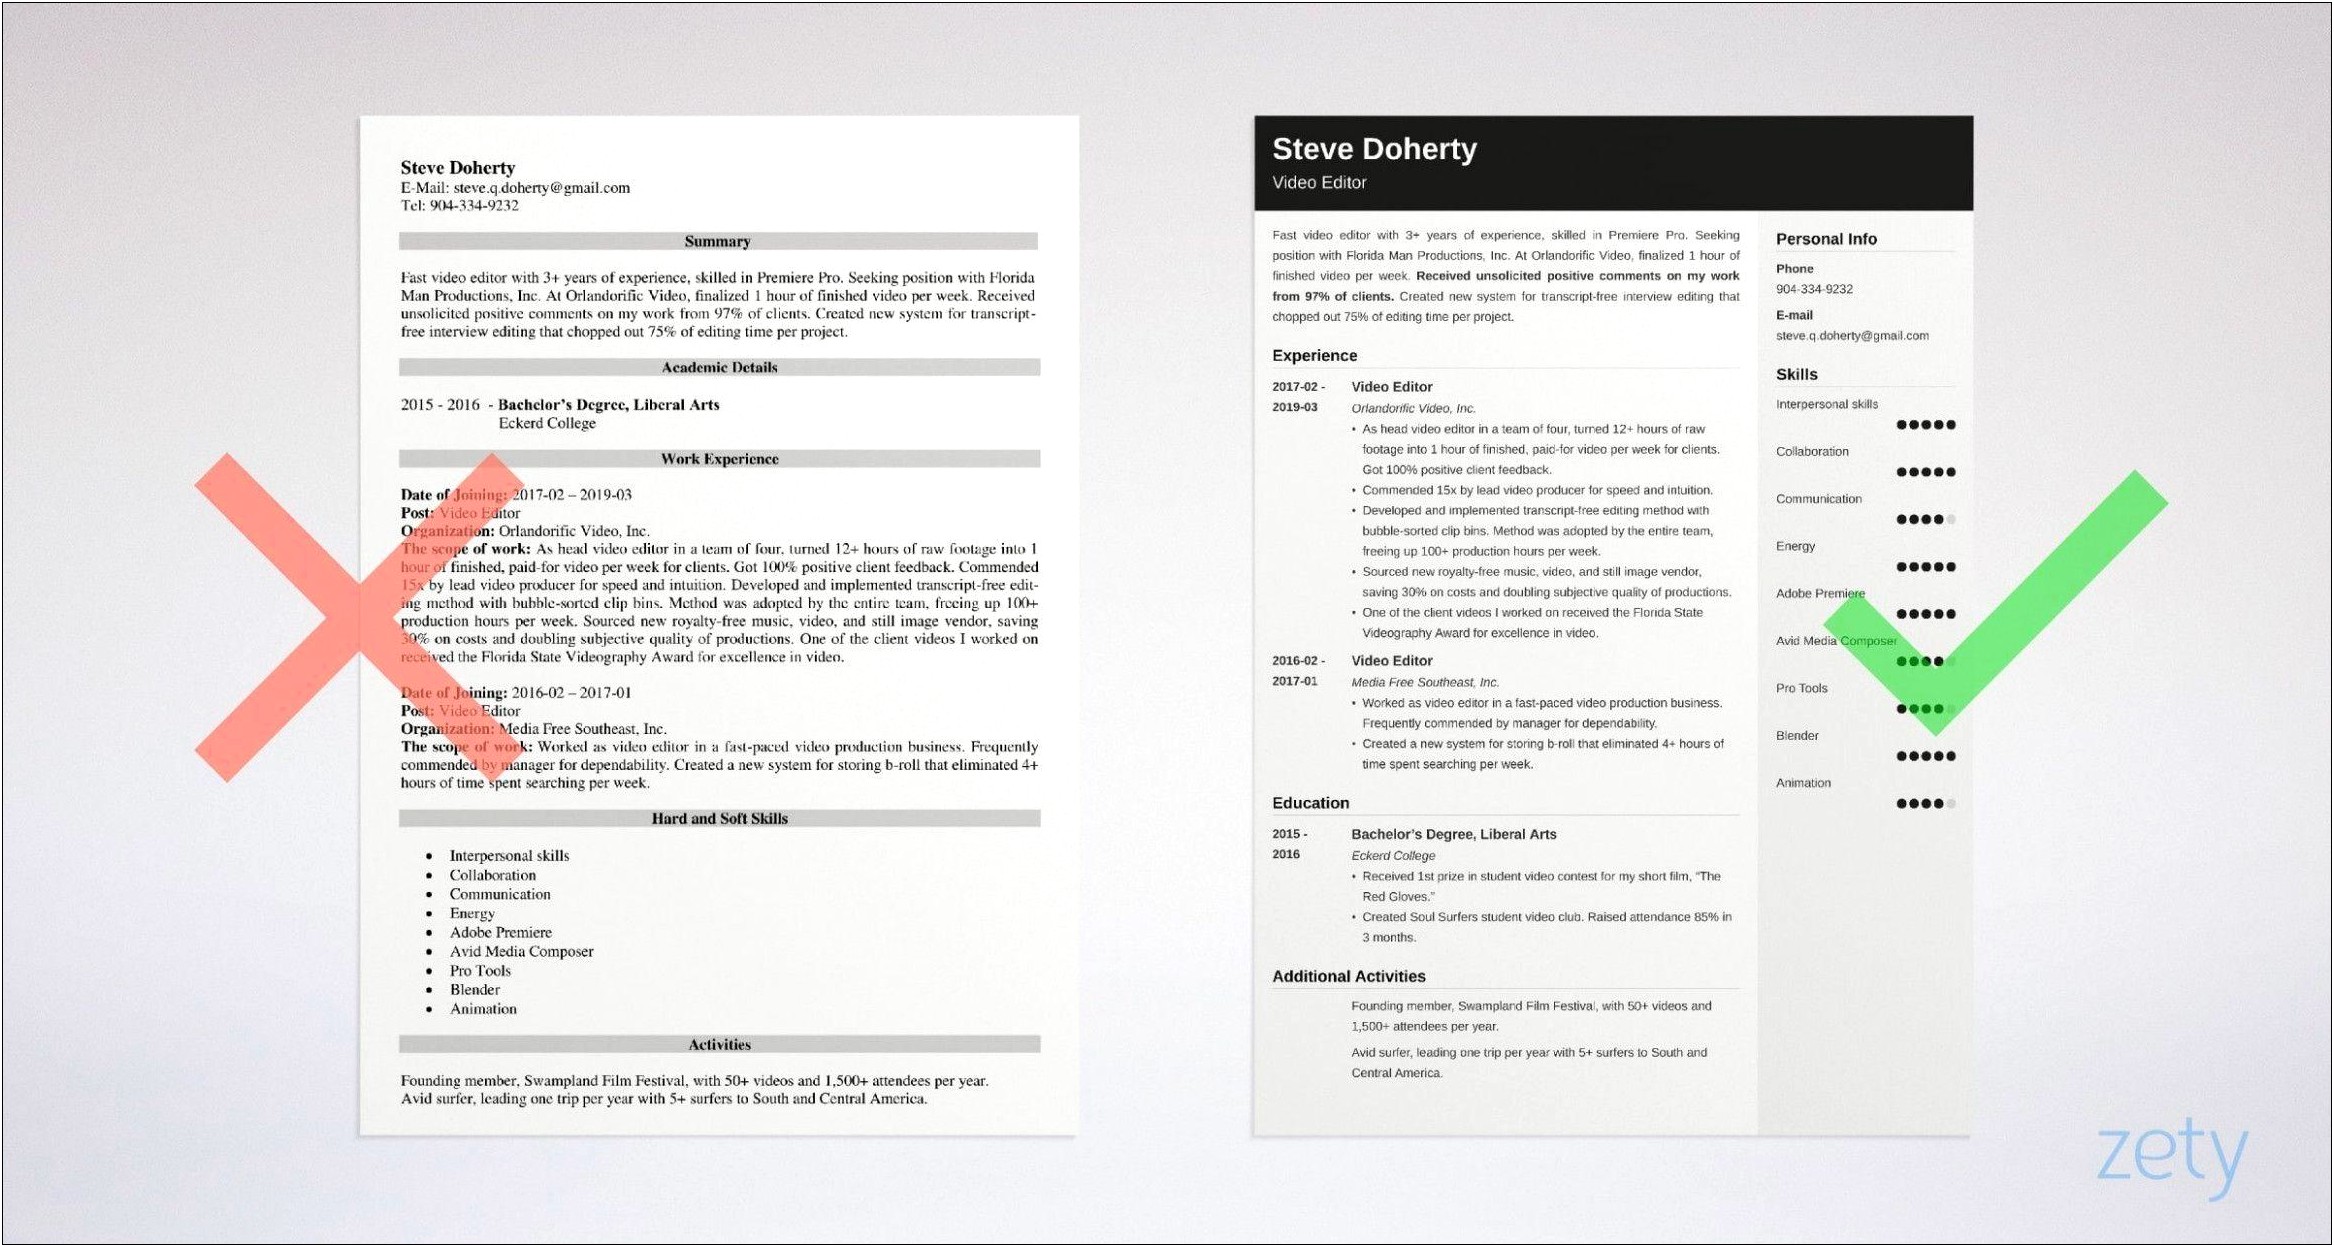 Best Way To Write A Chronological Resume